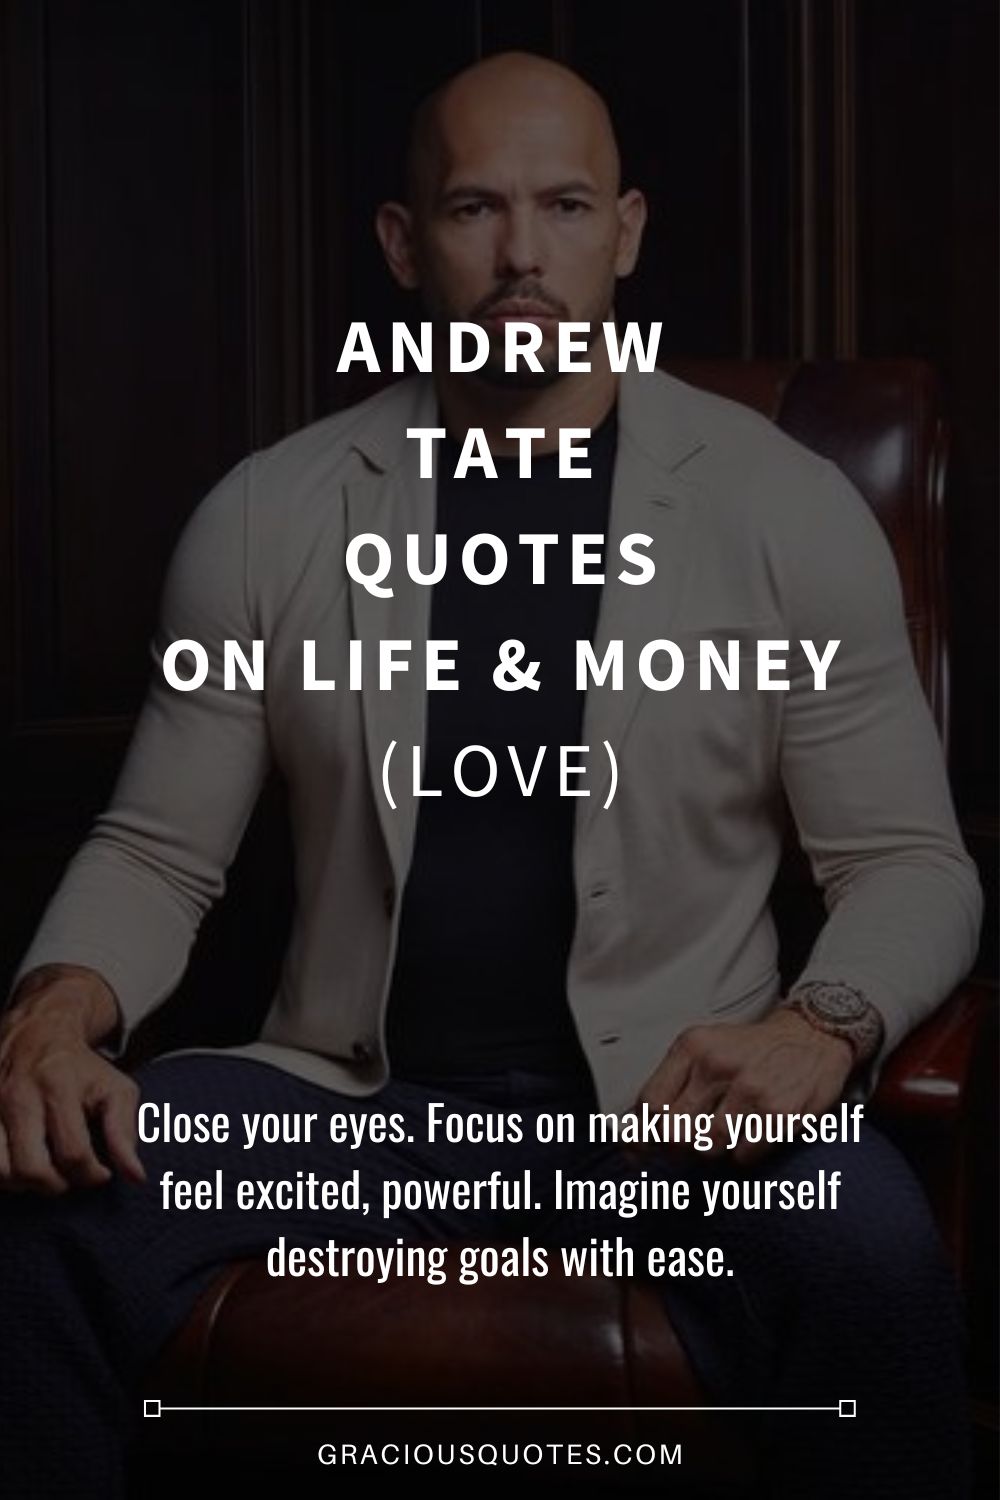 Andrew Tate Quotes on Life & Money (LOVE) - Gracious Quotes